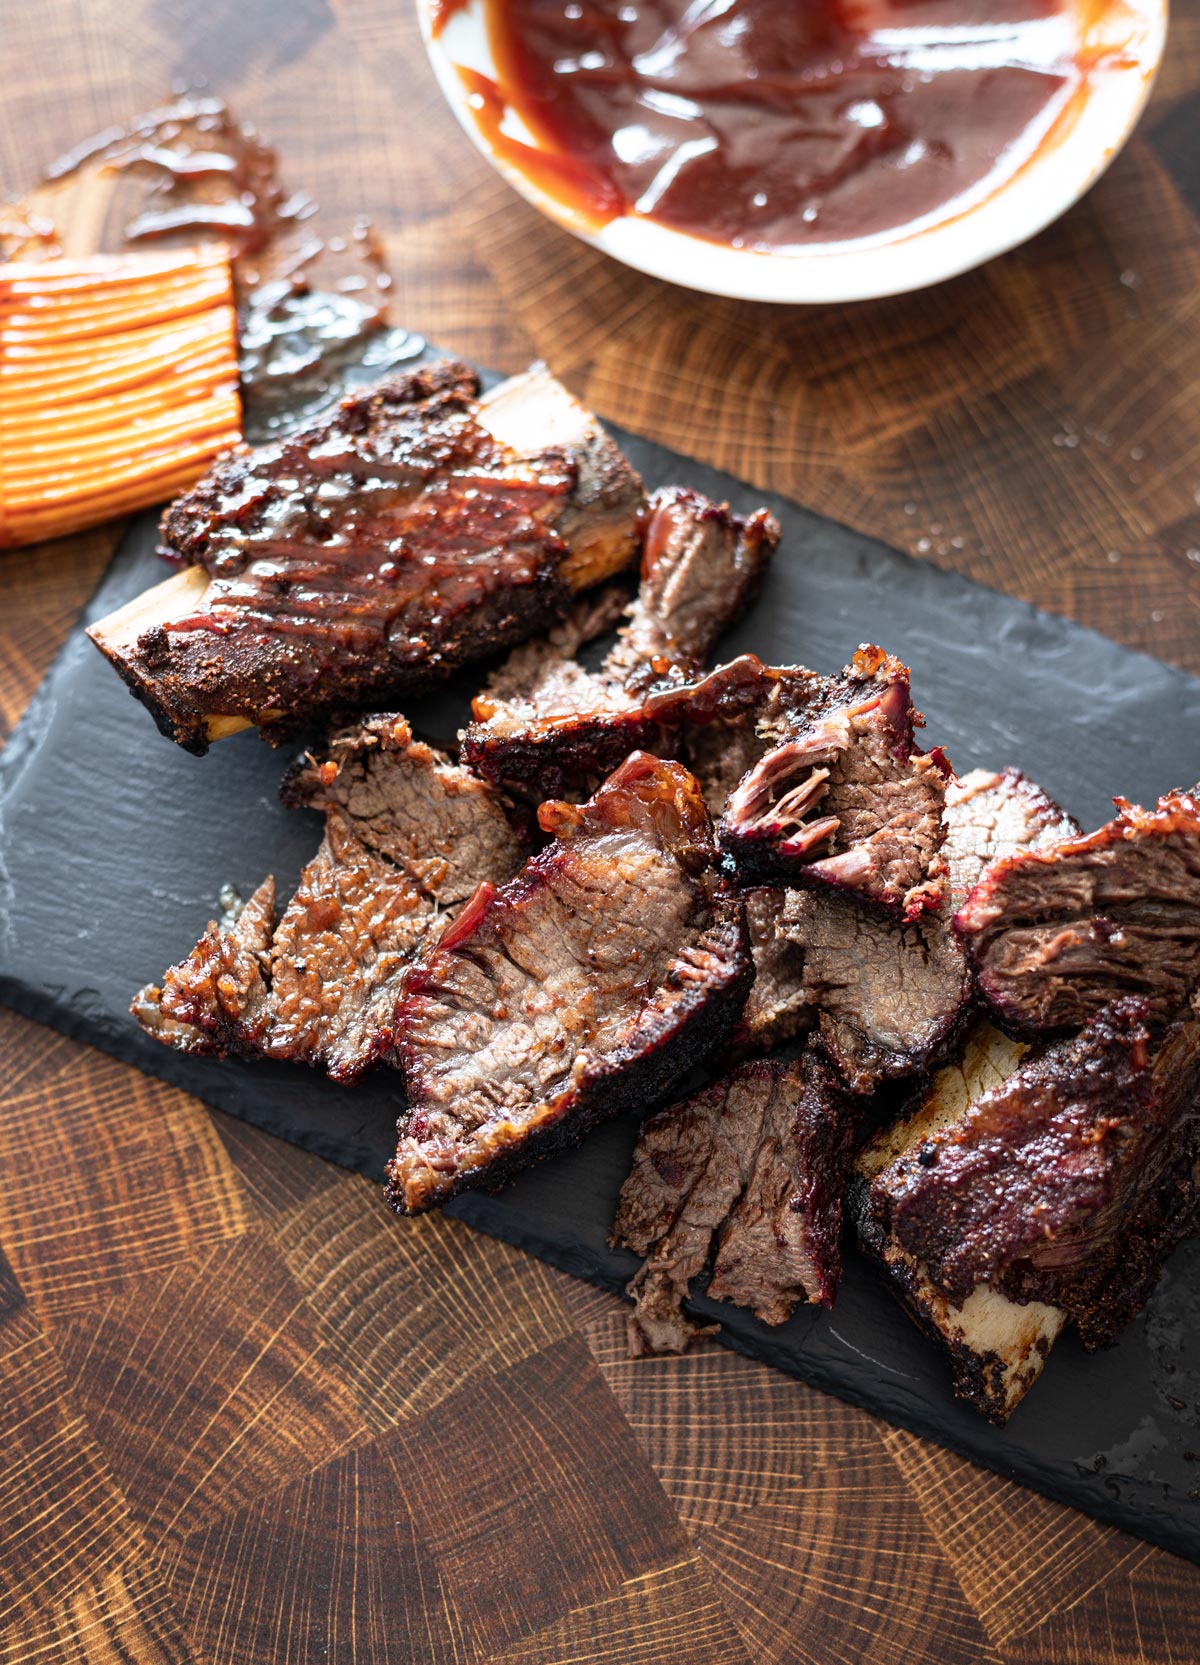 Sliced short ribs lathered in BBQ sauce. 